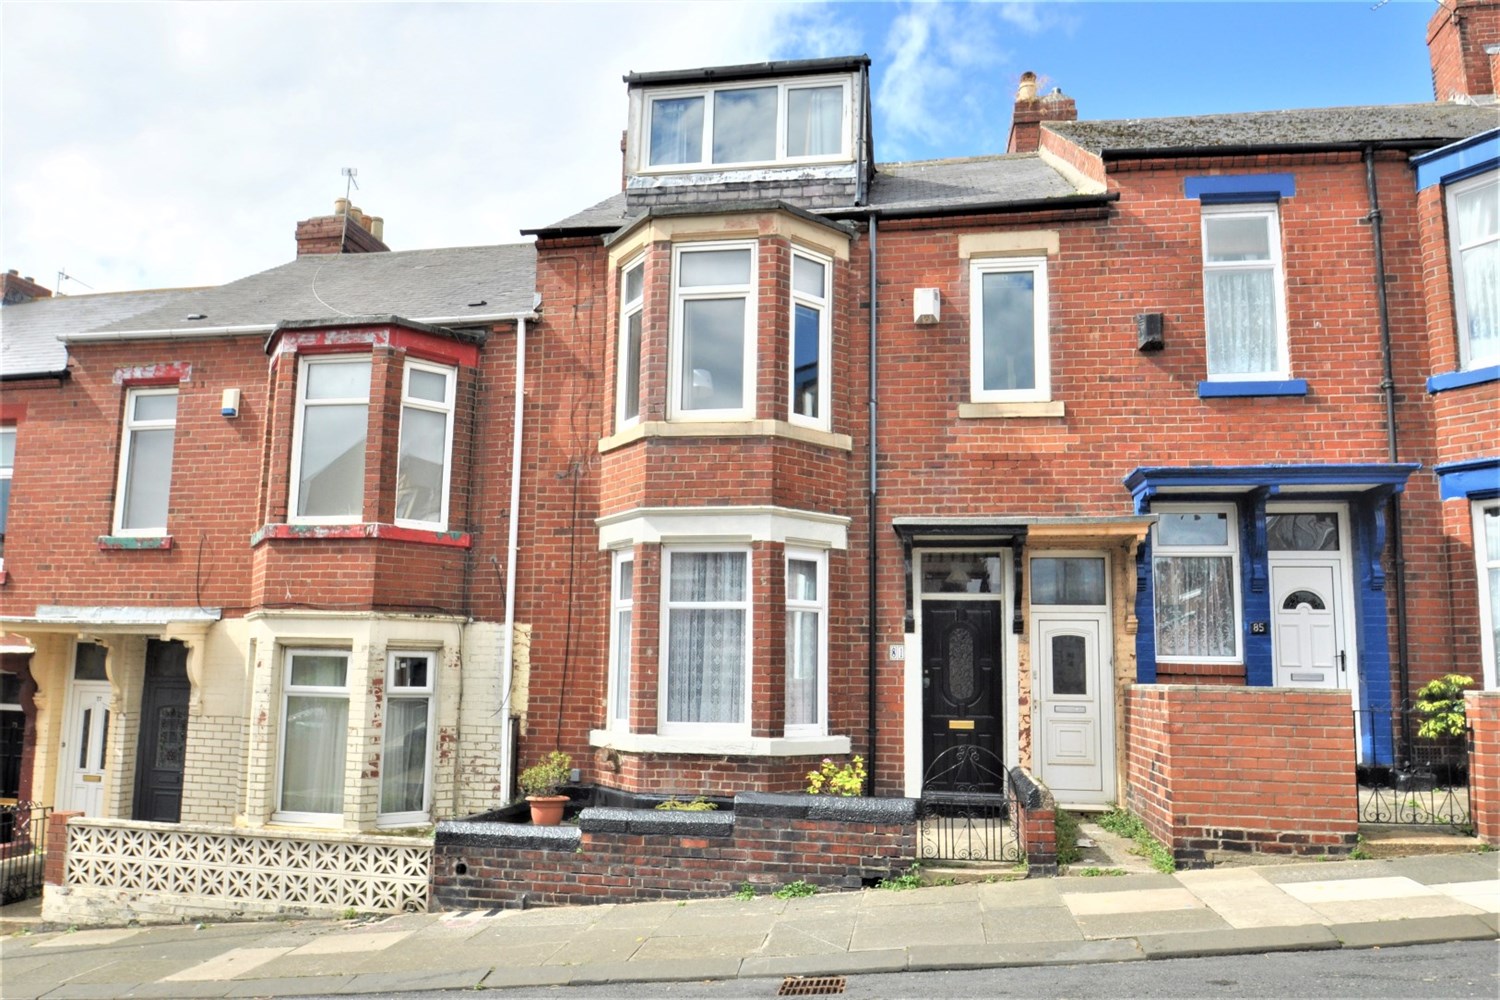 3 bed maisonette for sale in Roman Road, South Shields - Property Image 1